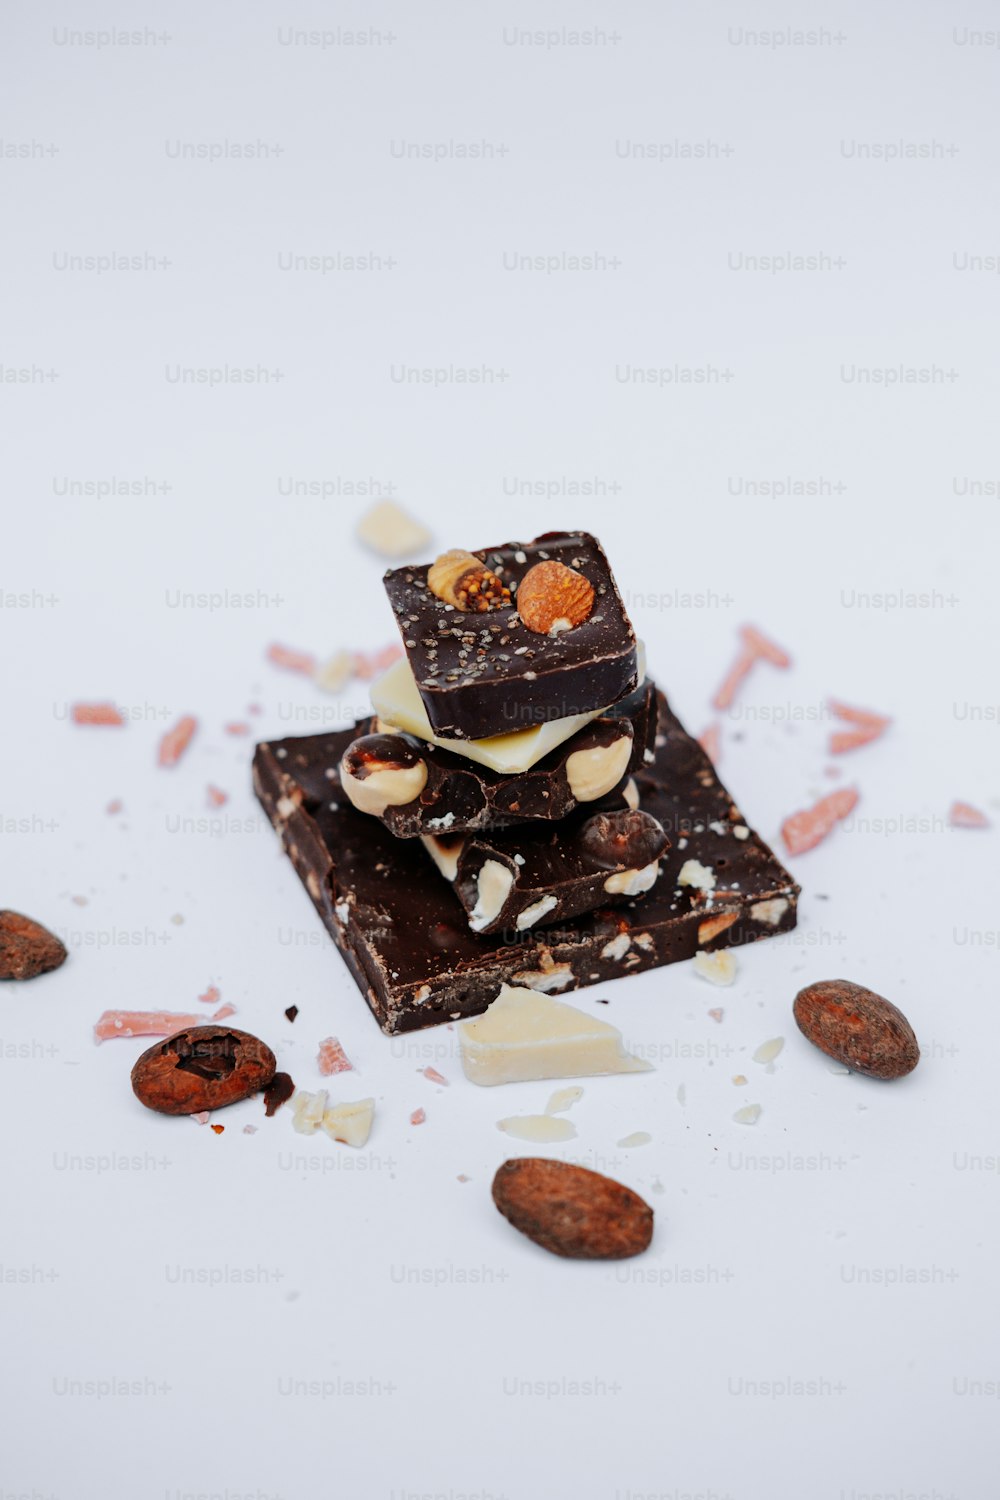 a pile of chocolate and nuts on a white surface